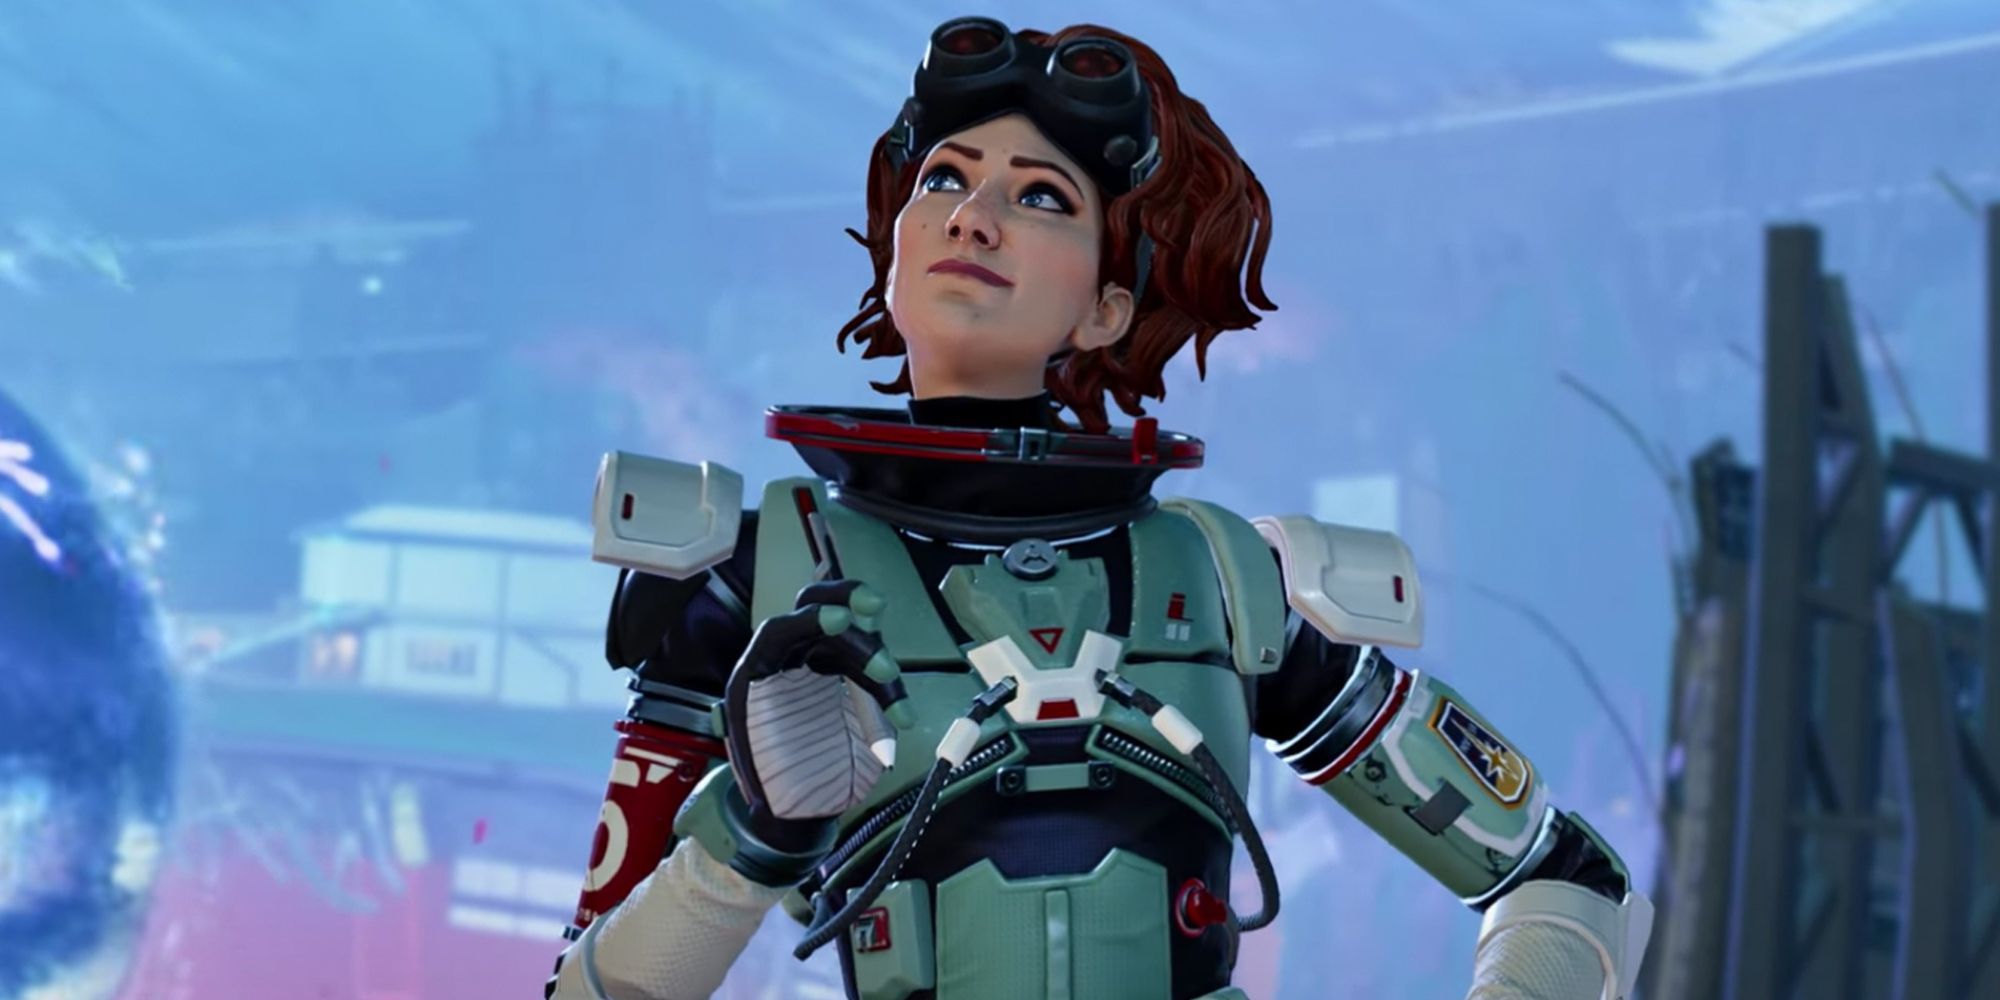 Horizon from Apex Legends looks up